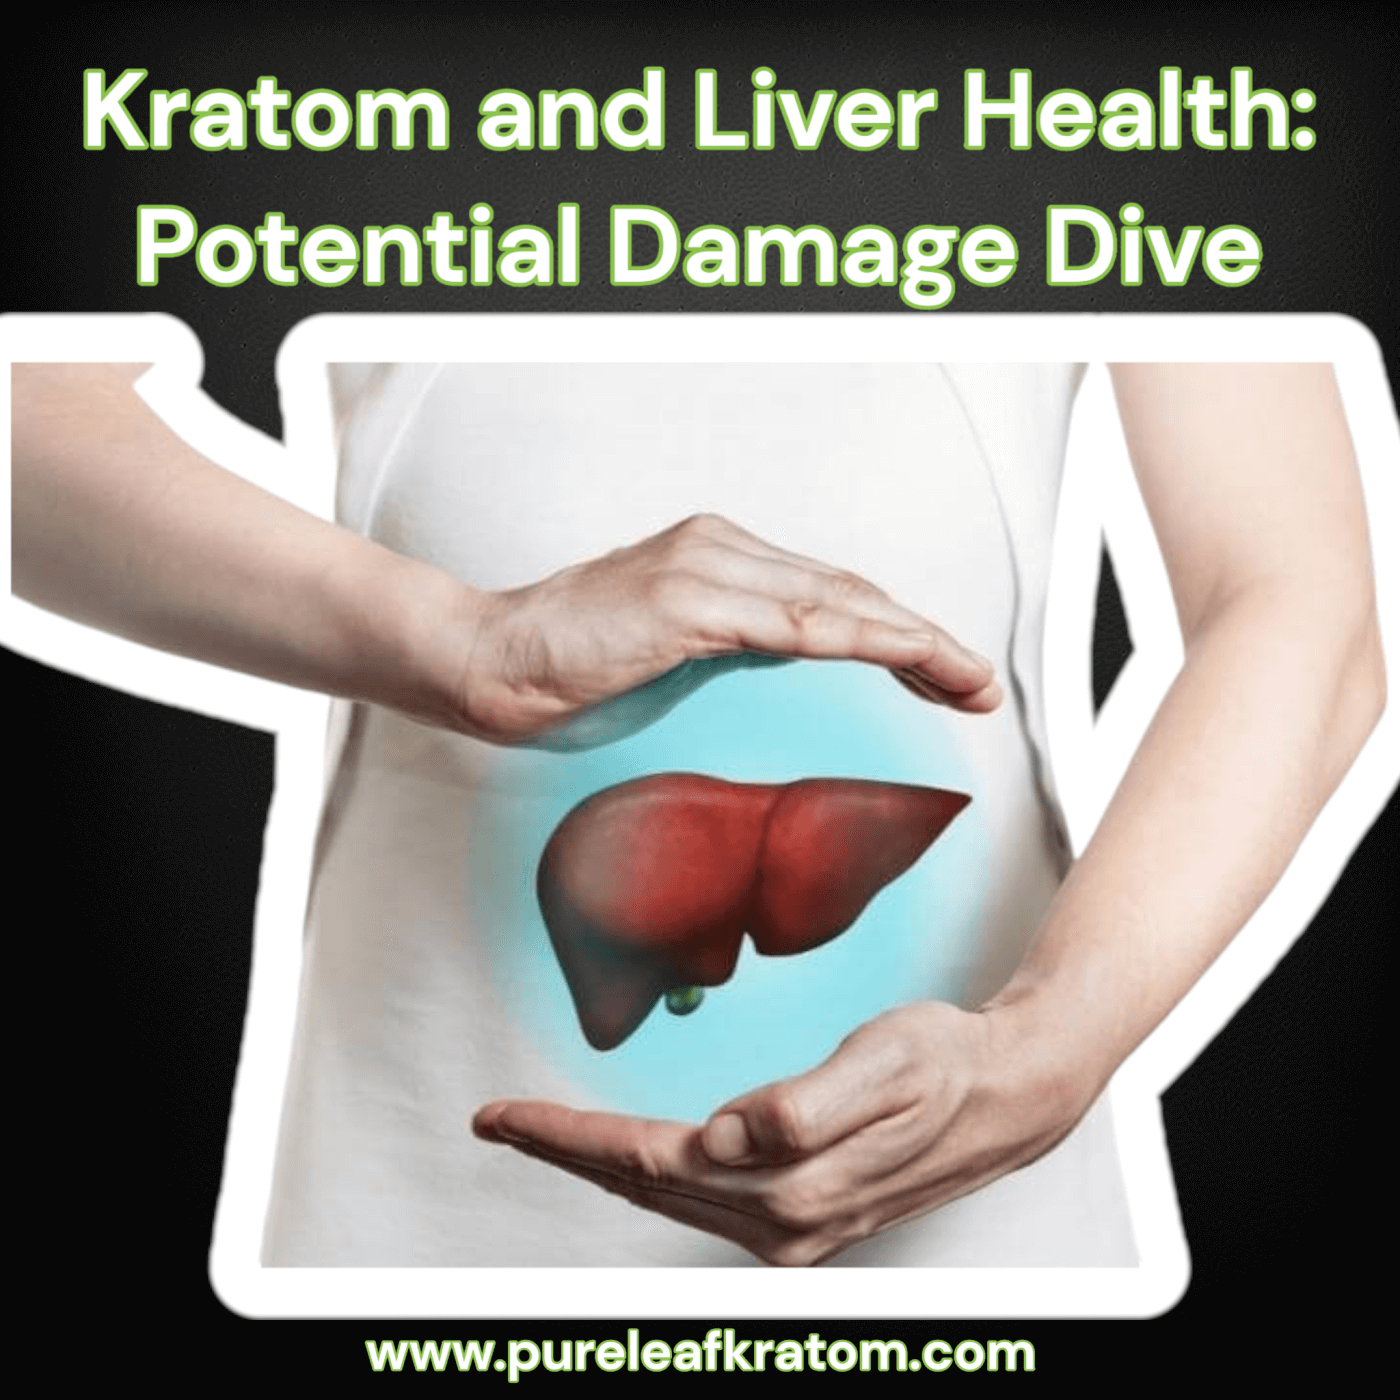 'Is Kratom Bad for the Liver? A Deep Dive into Potential Liver Damage Associated with its Use'